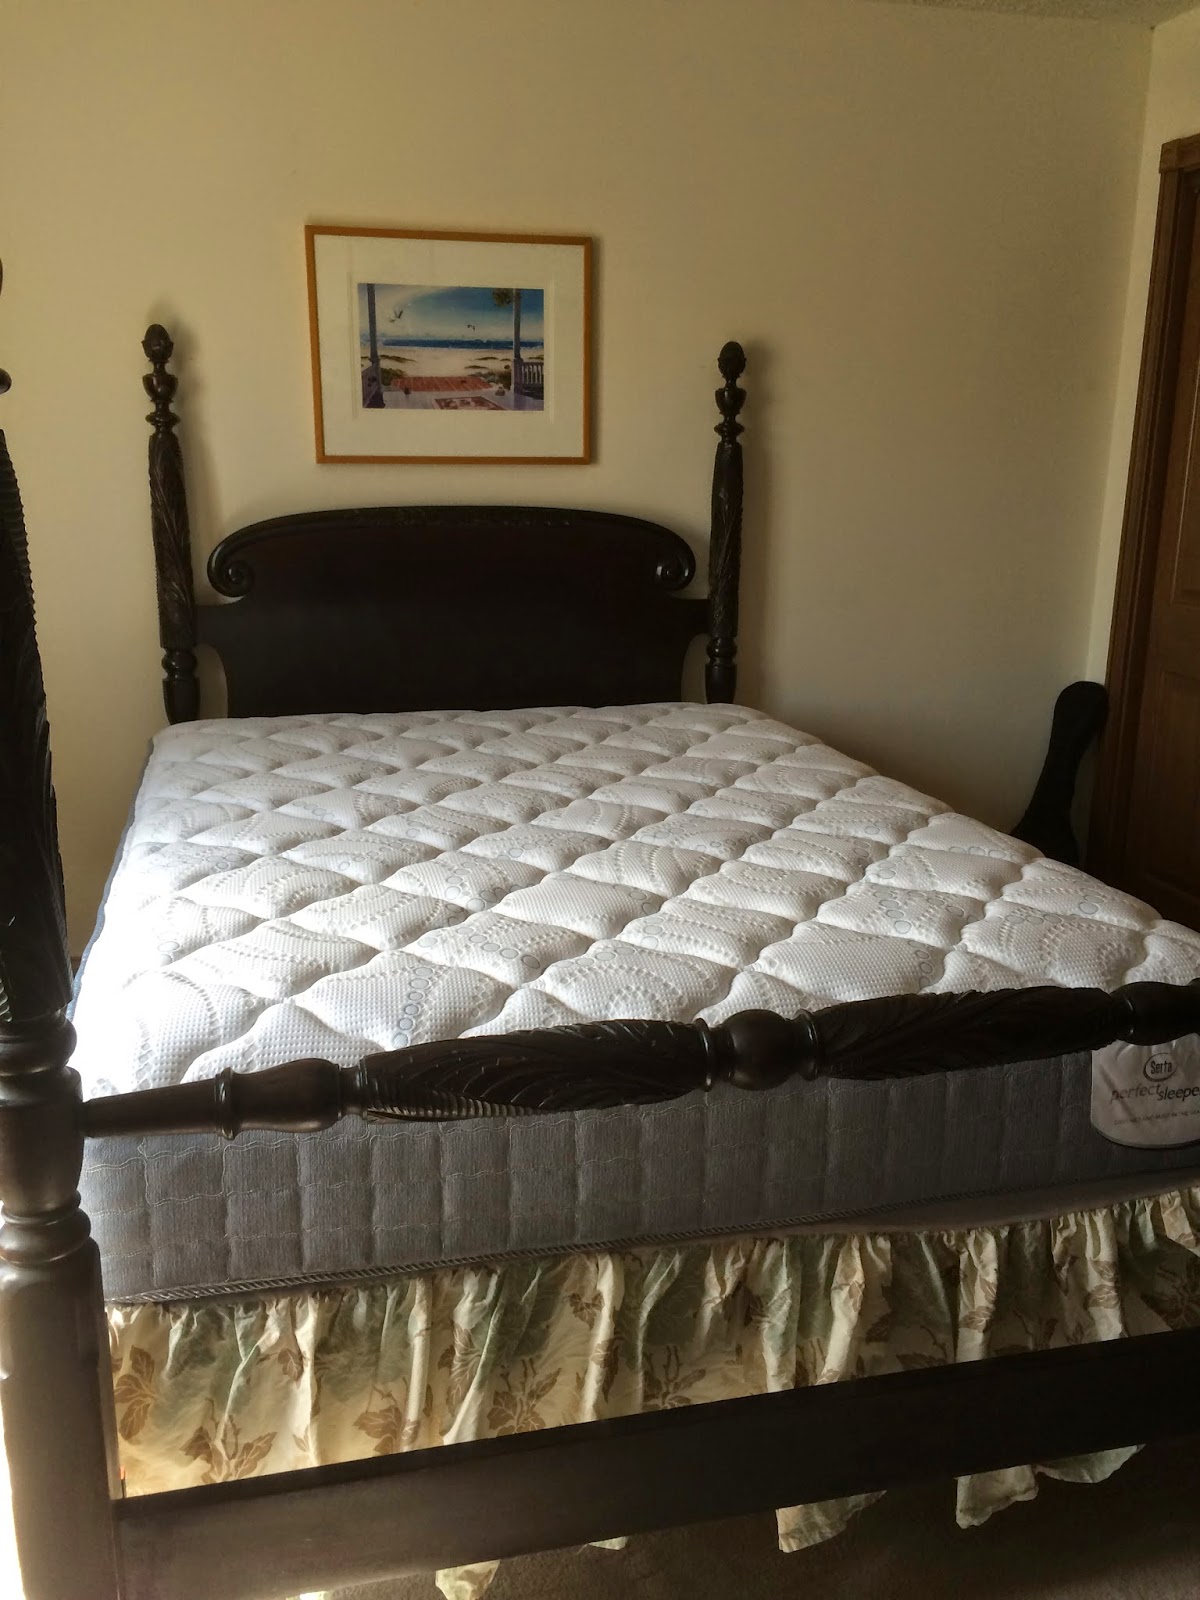 Converting Antique Bed To Queen Mattress, Can You Make A Full Bed Into Queen